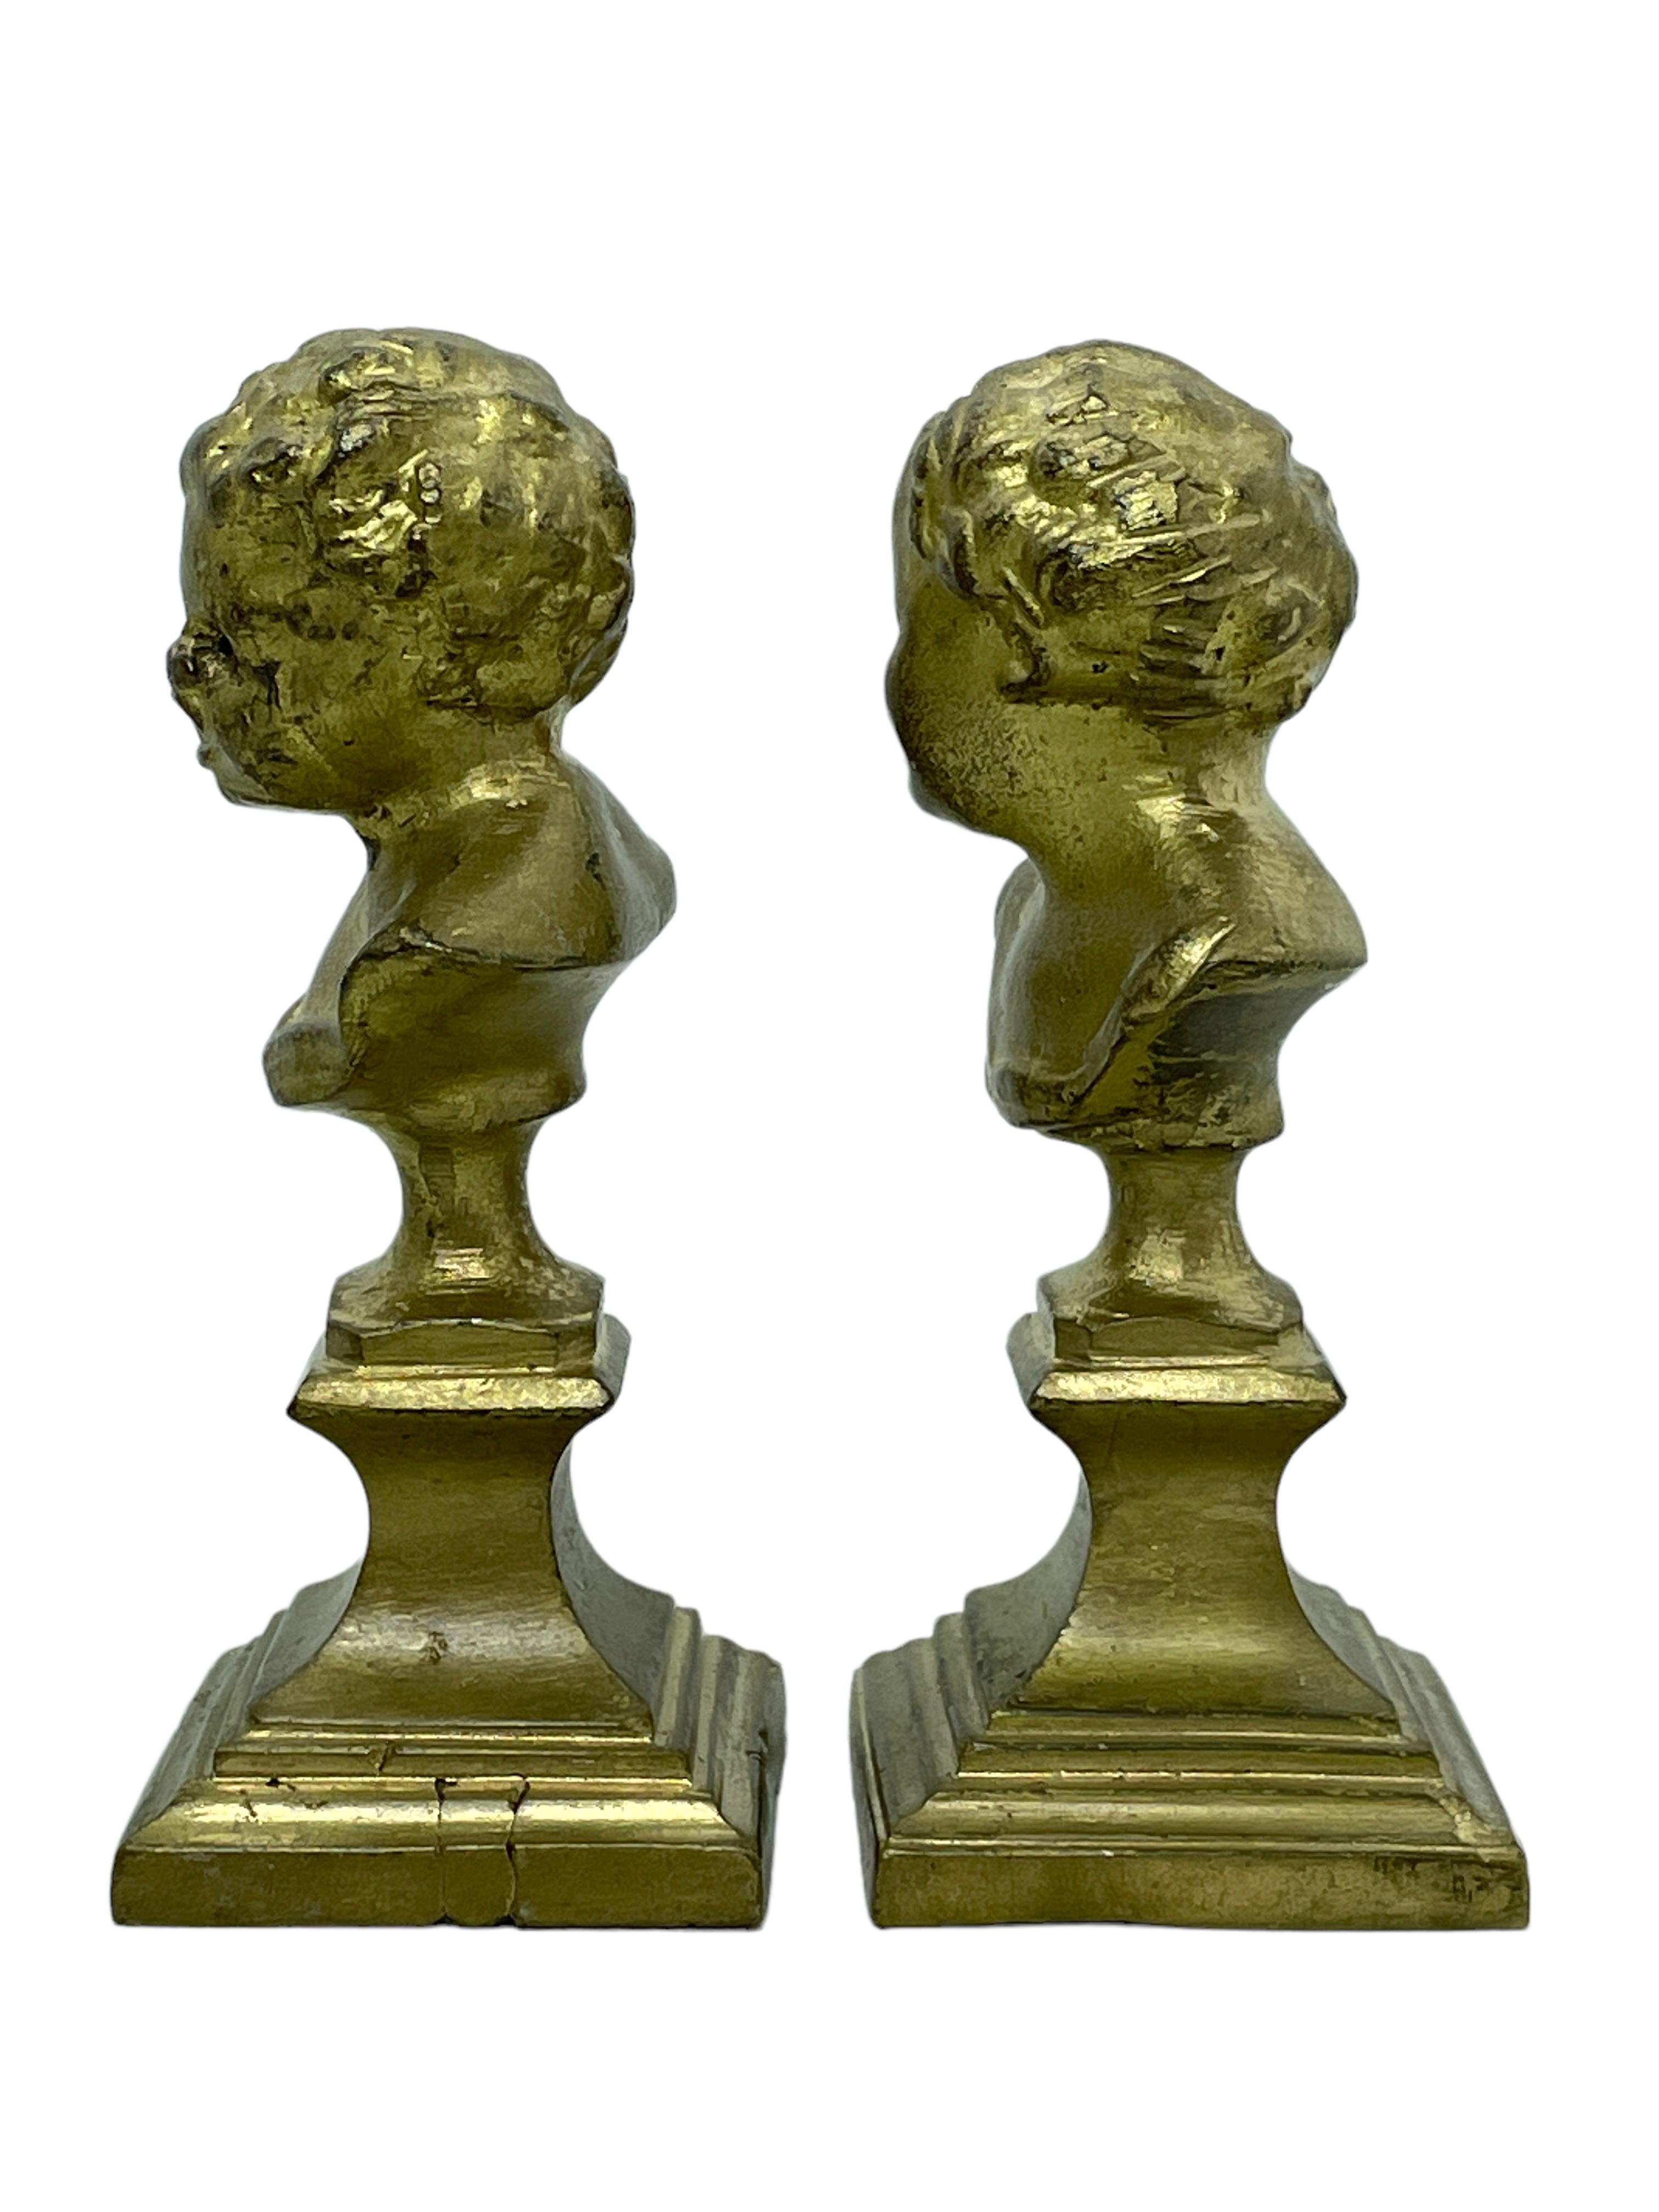 A pair of classic decorative Bust statues. Some wear with a nice patina, but this is old-age. Made of a kind of metal, we think its gilded bronze. Very decorative and nice to display in your collection of miniatures or any room.